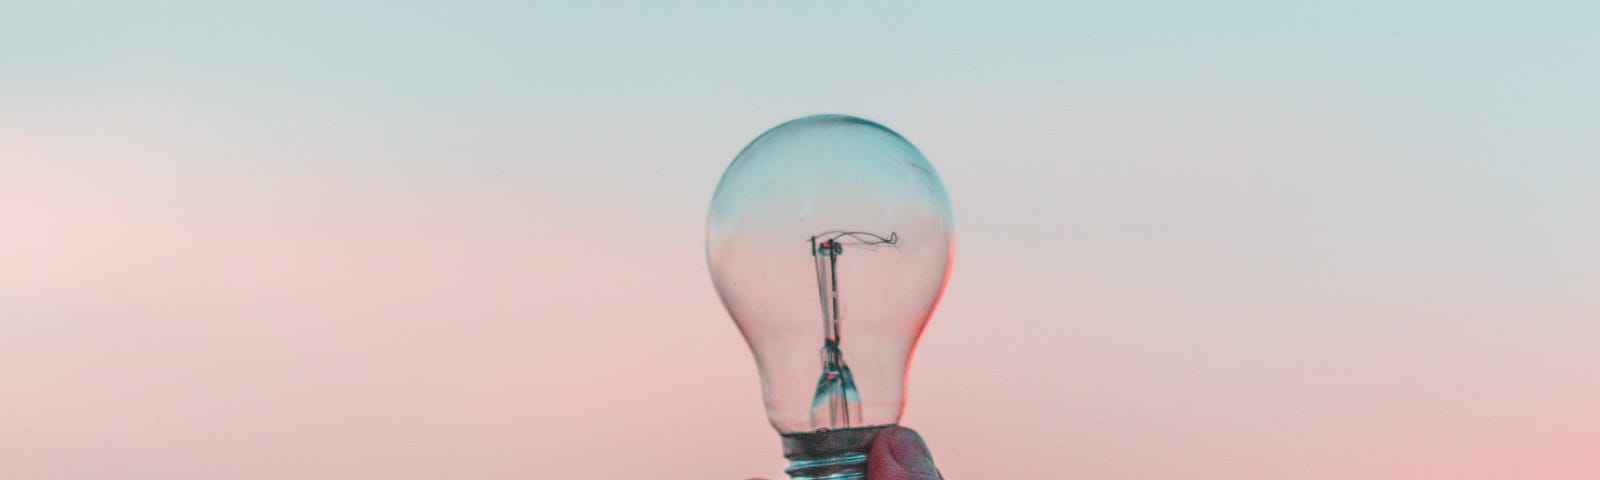 A person holding up a lightbulb on a gradient background.